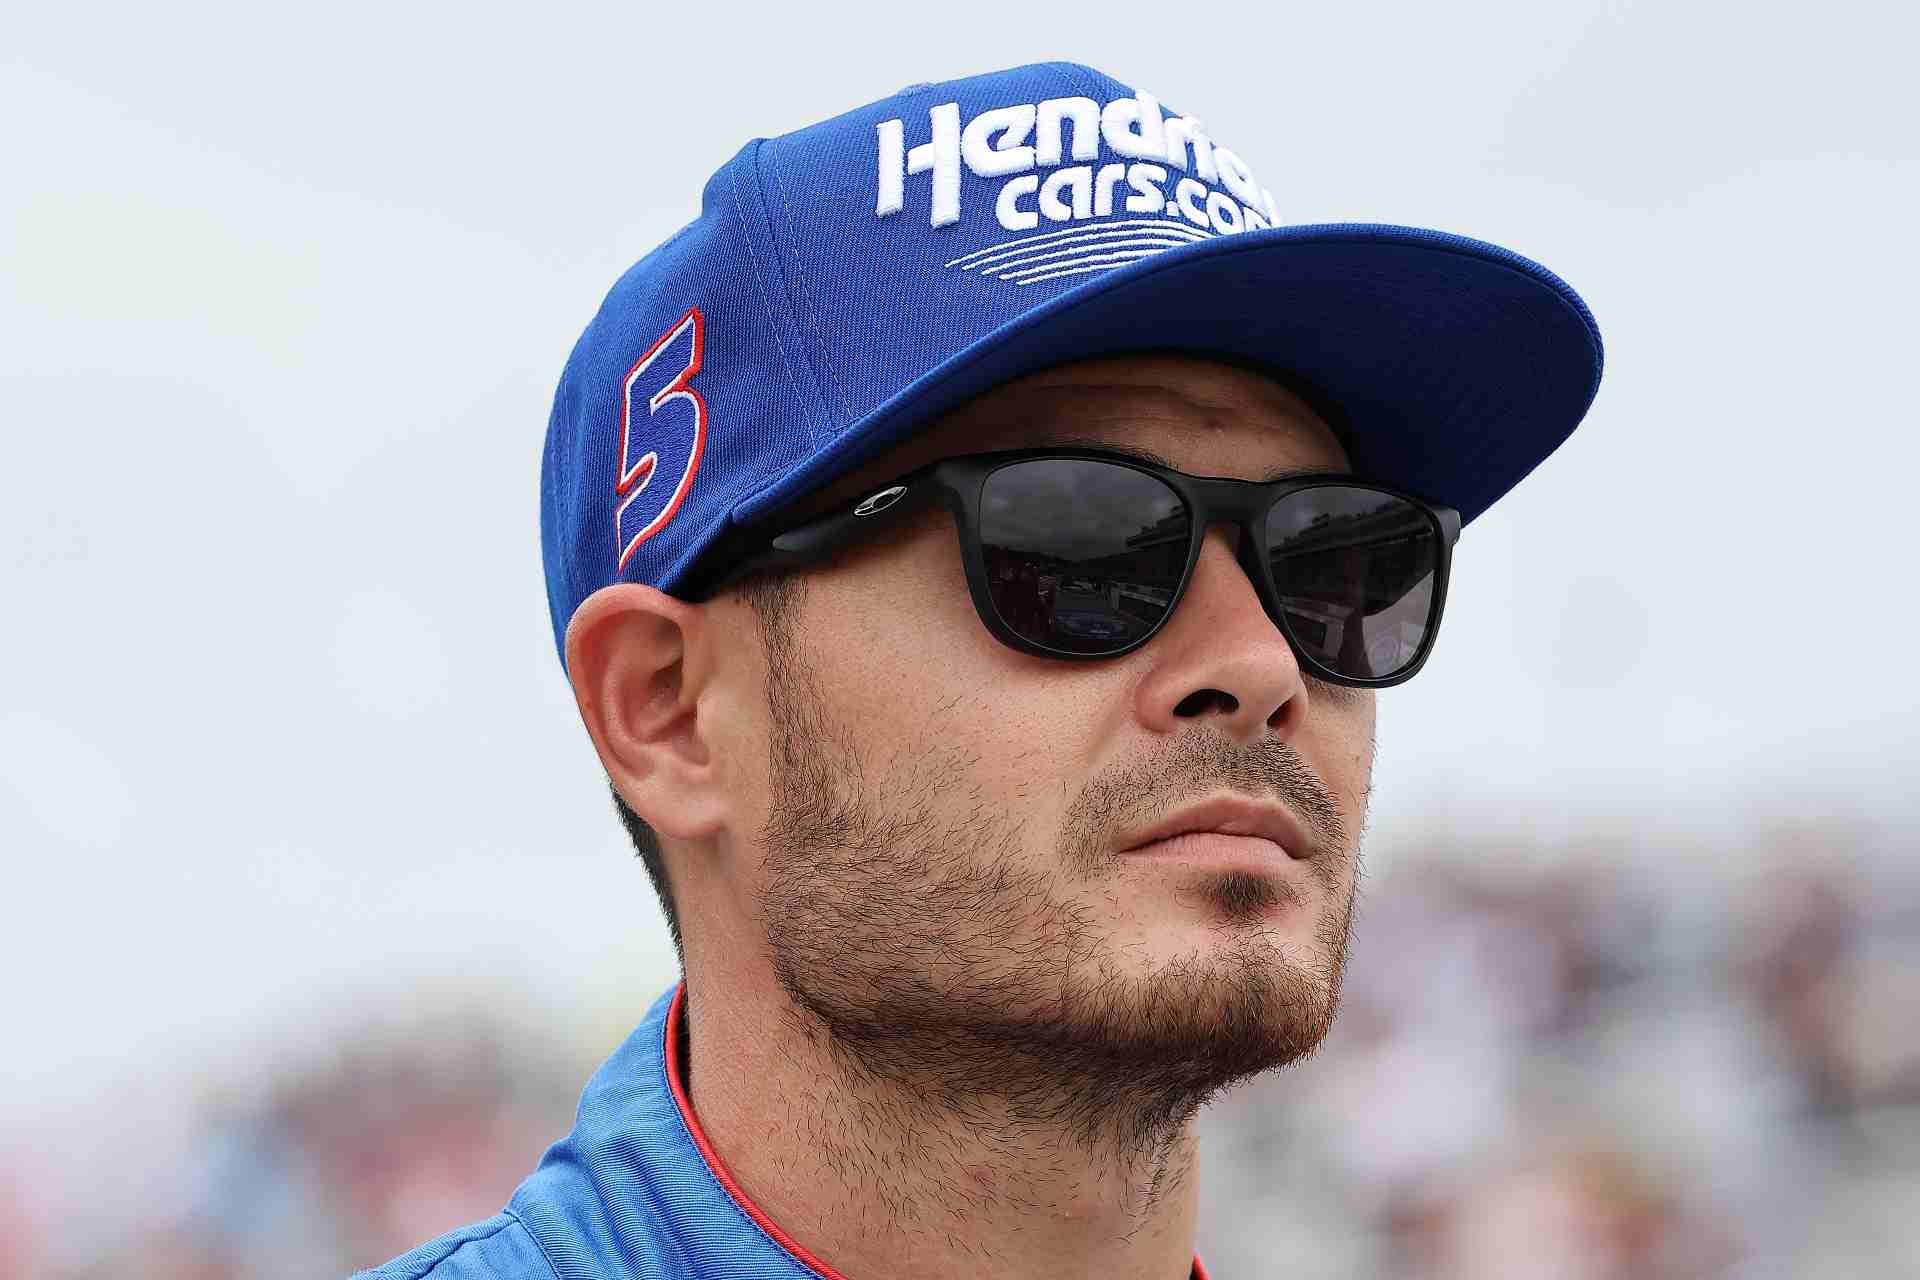 LOUDON, NEW HAMPSHIRE - JULY 18: Kyle Larson, driver of the #5 HendrickCars.com Chevrolet, waits on the grid prior to the NASCAR Cup Series Foxwoods Resort Casino 301 at New Hampshire Motor Speedway on July 18, 2021 in Loudon, New Hampshire. (Photo by James Gilbert/Getty Images)